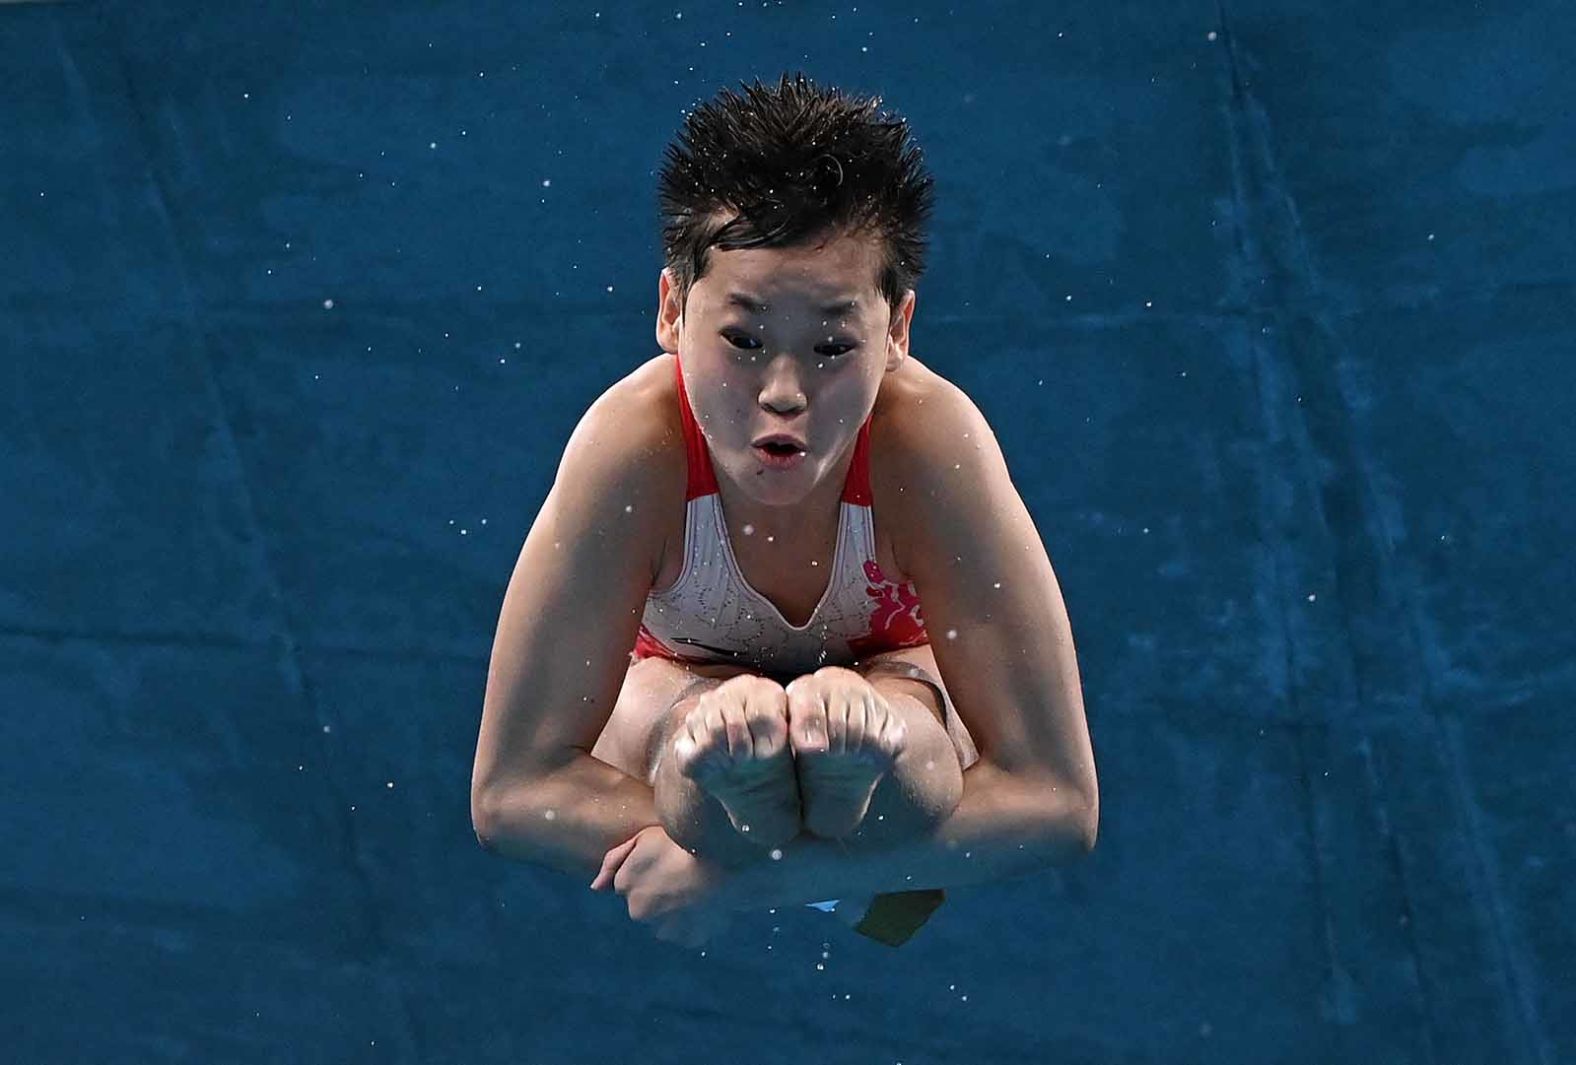 Chinese diver Quan Hongchan competes in the 10-meter platform final on Thursday, August 5. The 14-year-old is the second-youngest female ever <a href="index.php?page=&url=https%3A%2F%2Fwww.cnn.com%2Fworld%2Flive-news%2Ftokyo-2020-olympics-08-05-21-spt%2Fh_c25efb2c4e36e8ba76624d8c60fa3ab0" target="_blank">to win gold </a>in the event. Two of her dives were perfect 10s.